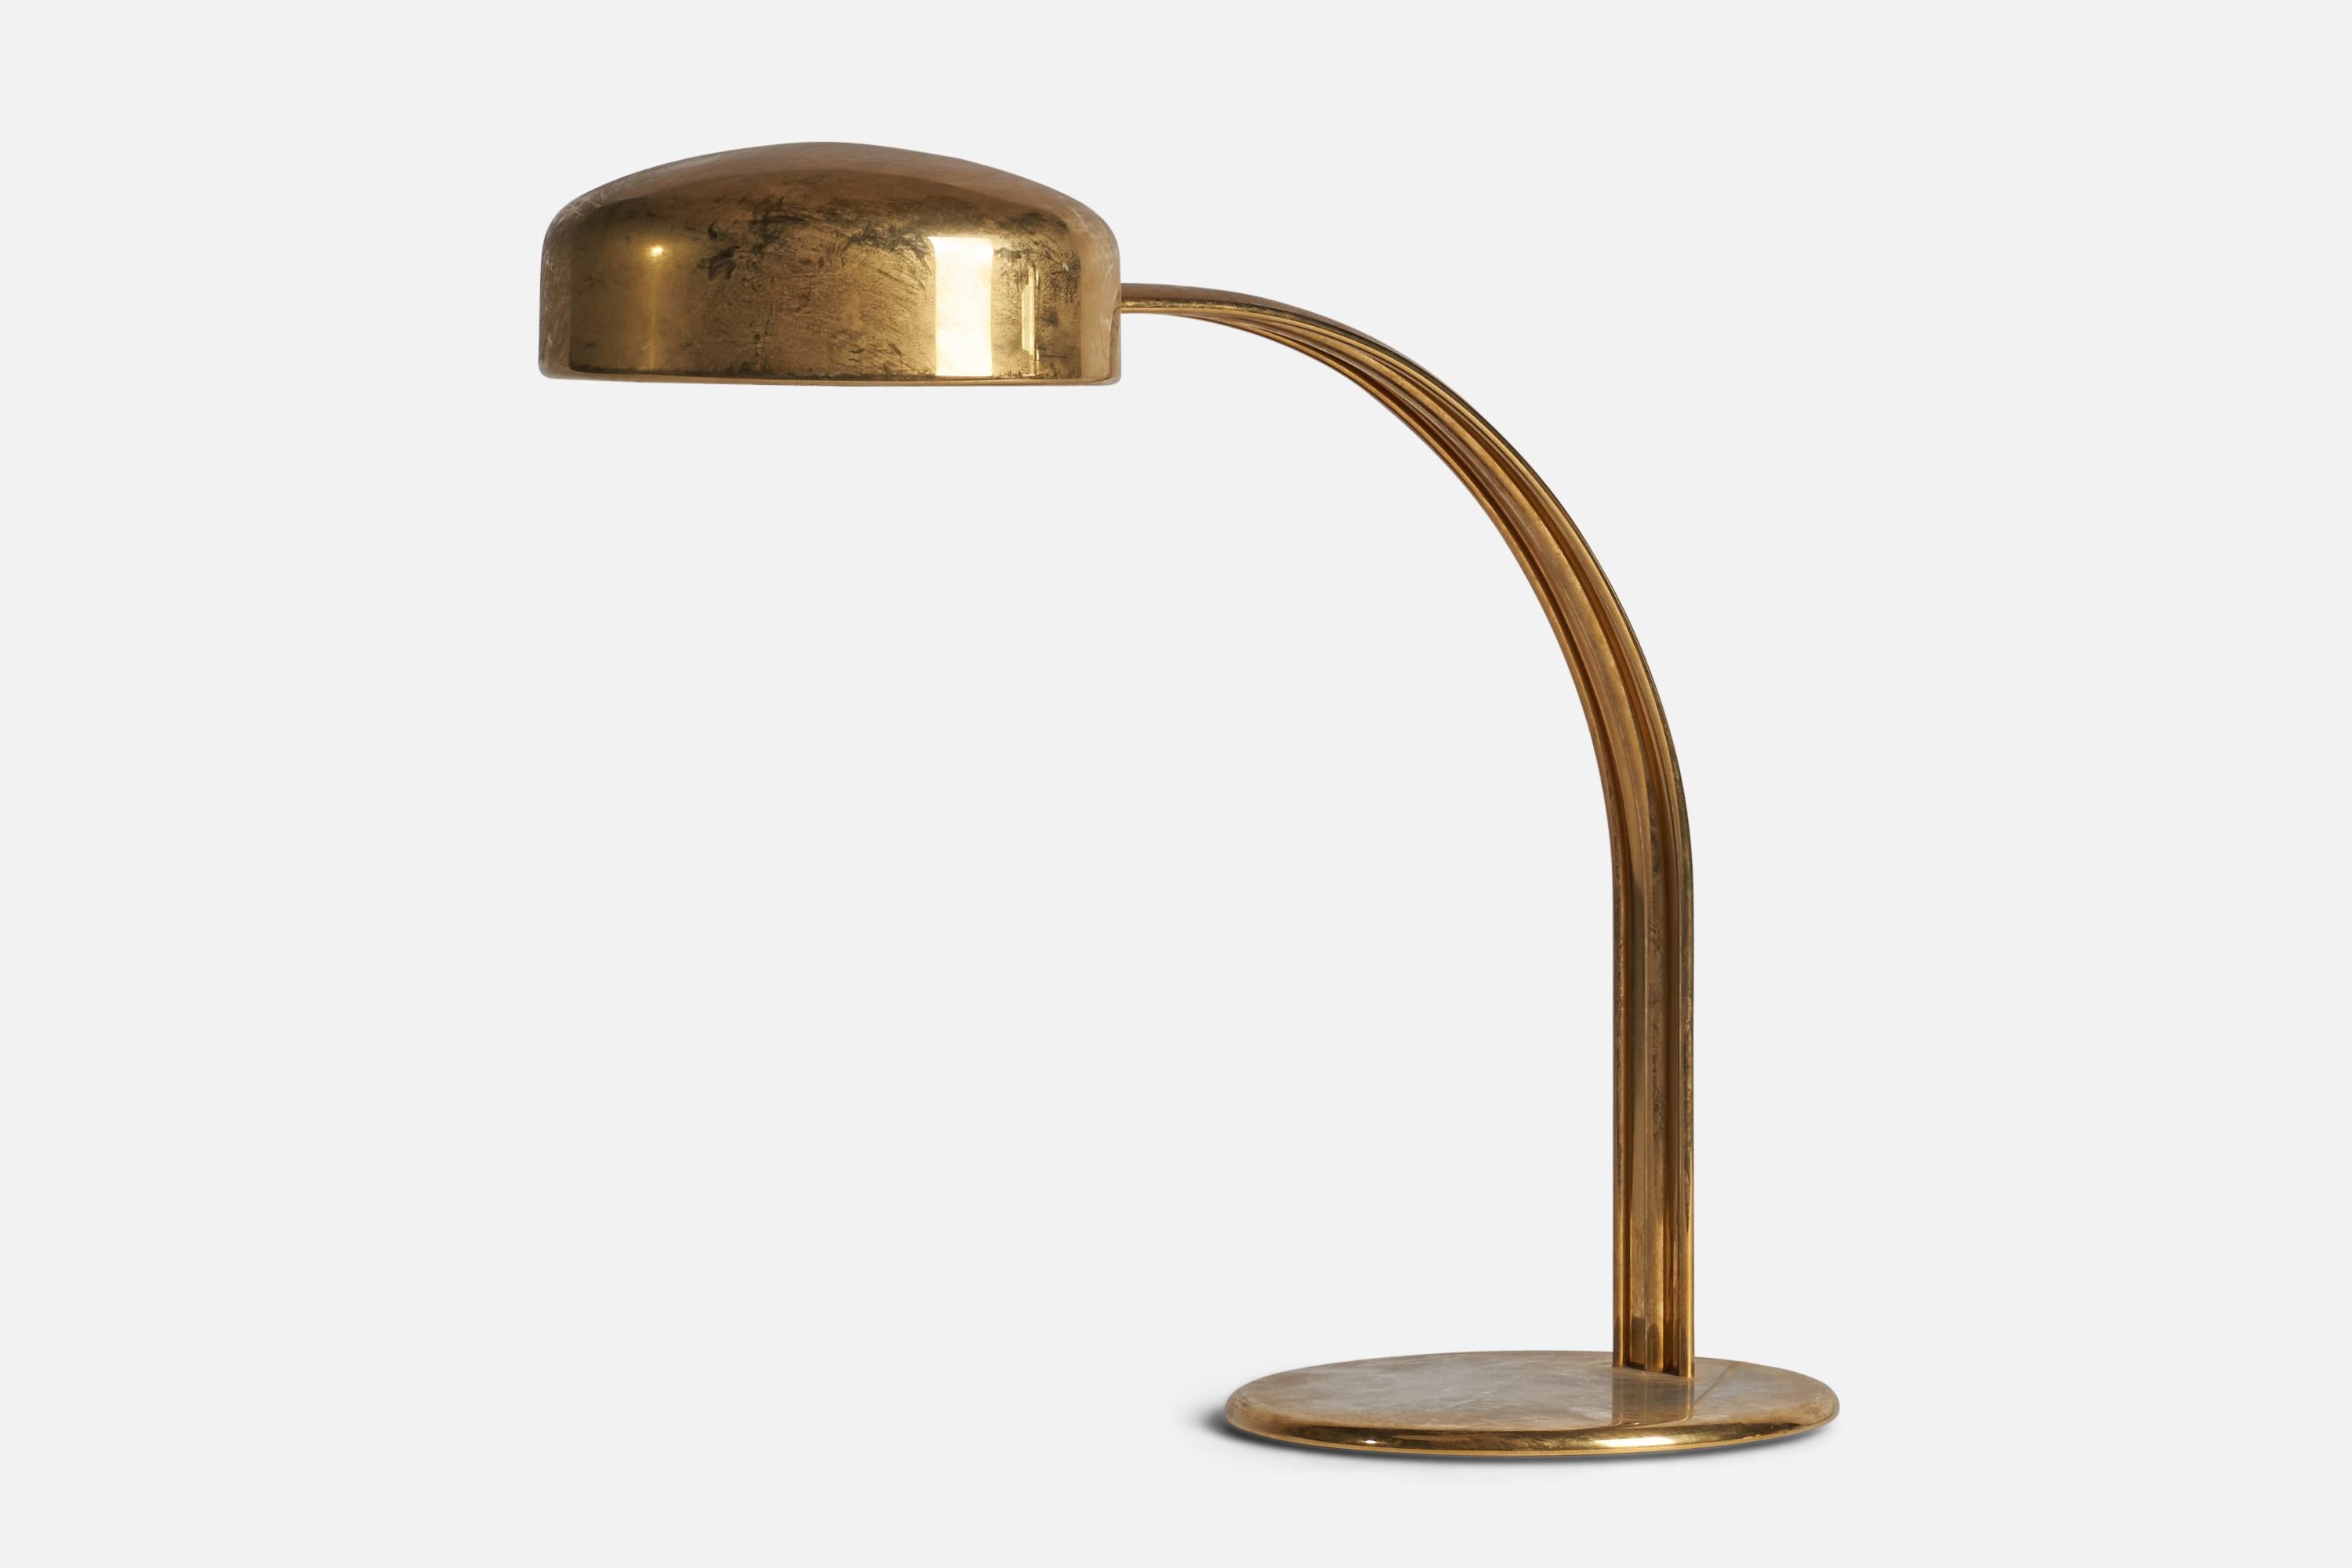 A large brass table lamp designed by Richard Carruthers and produced by Ateljé Lyktan, Sweden, 1960s.

Overall Dimensions (inches): 21.25” H x 10.25” W x 24” D
Bulb Specifications: E-26 Bulb
Number of Sockets: 1
All lighting will be converted for US